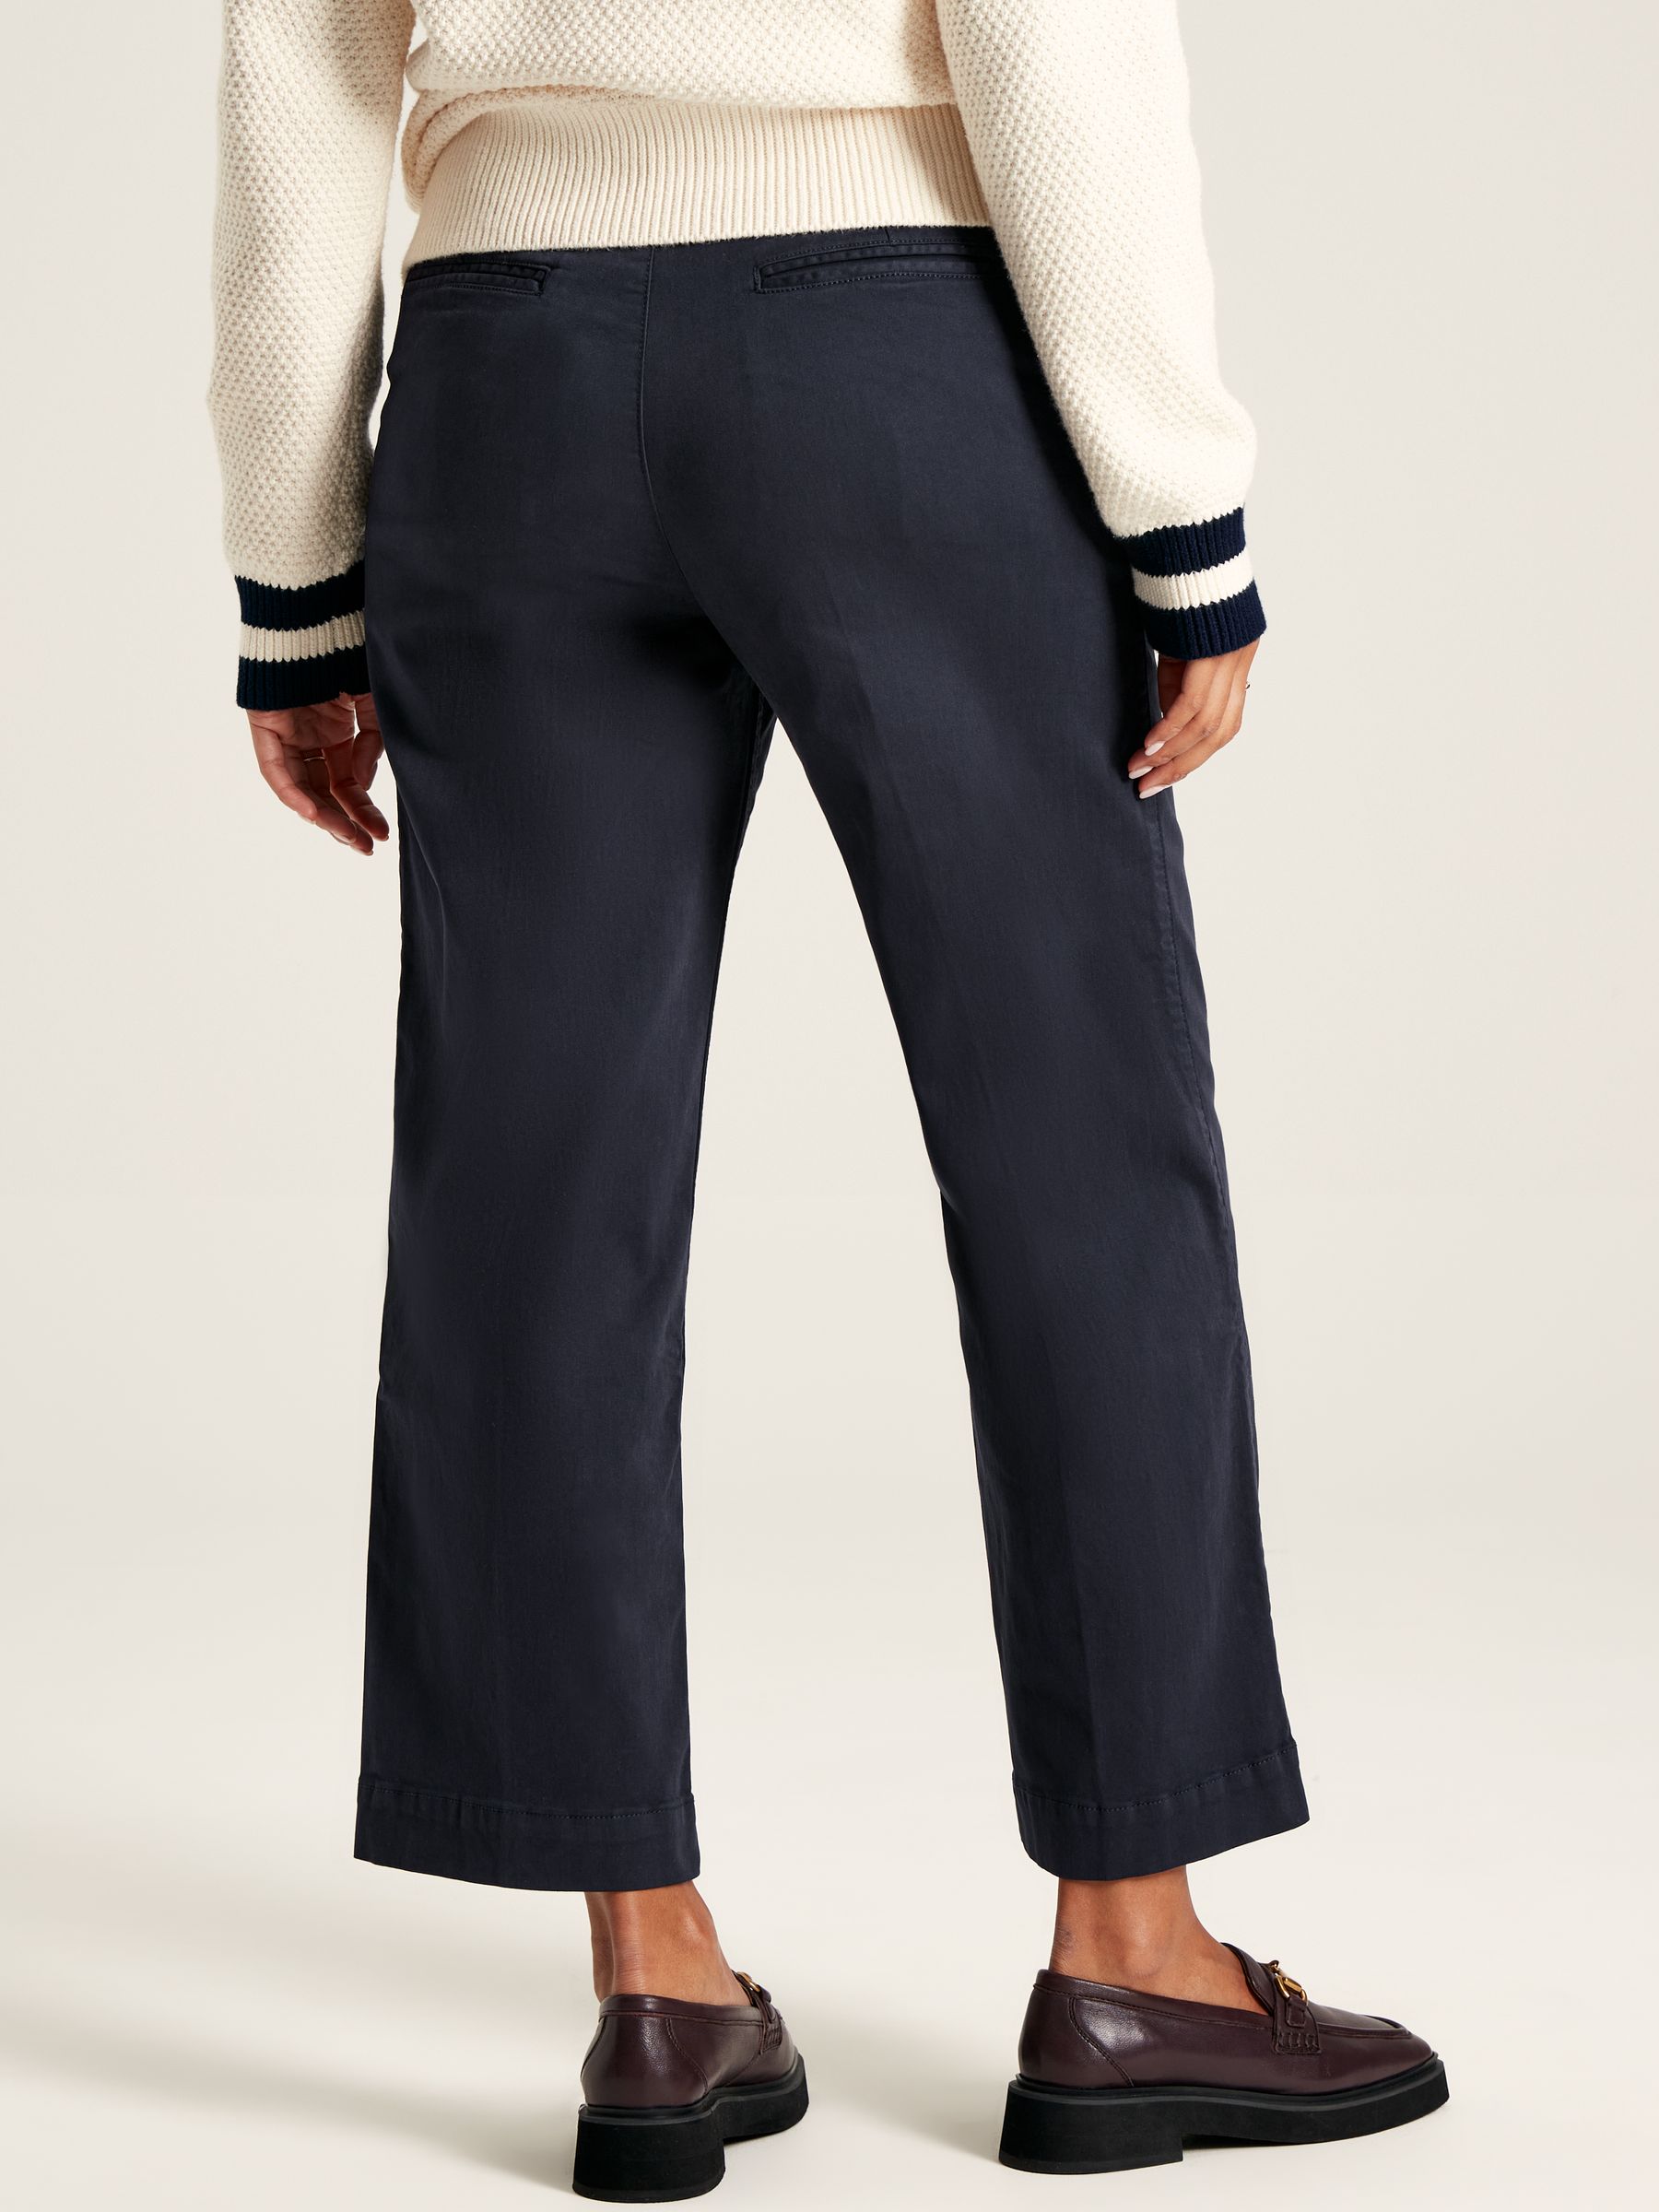 Buy Joules Cedar Straight Leg Chinos from the Joules online shop